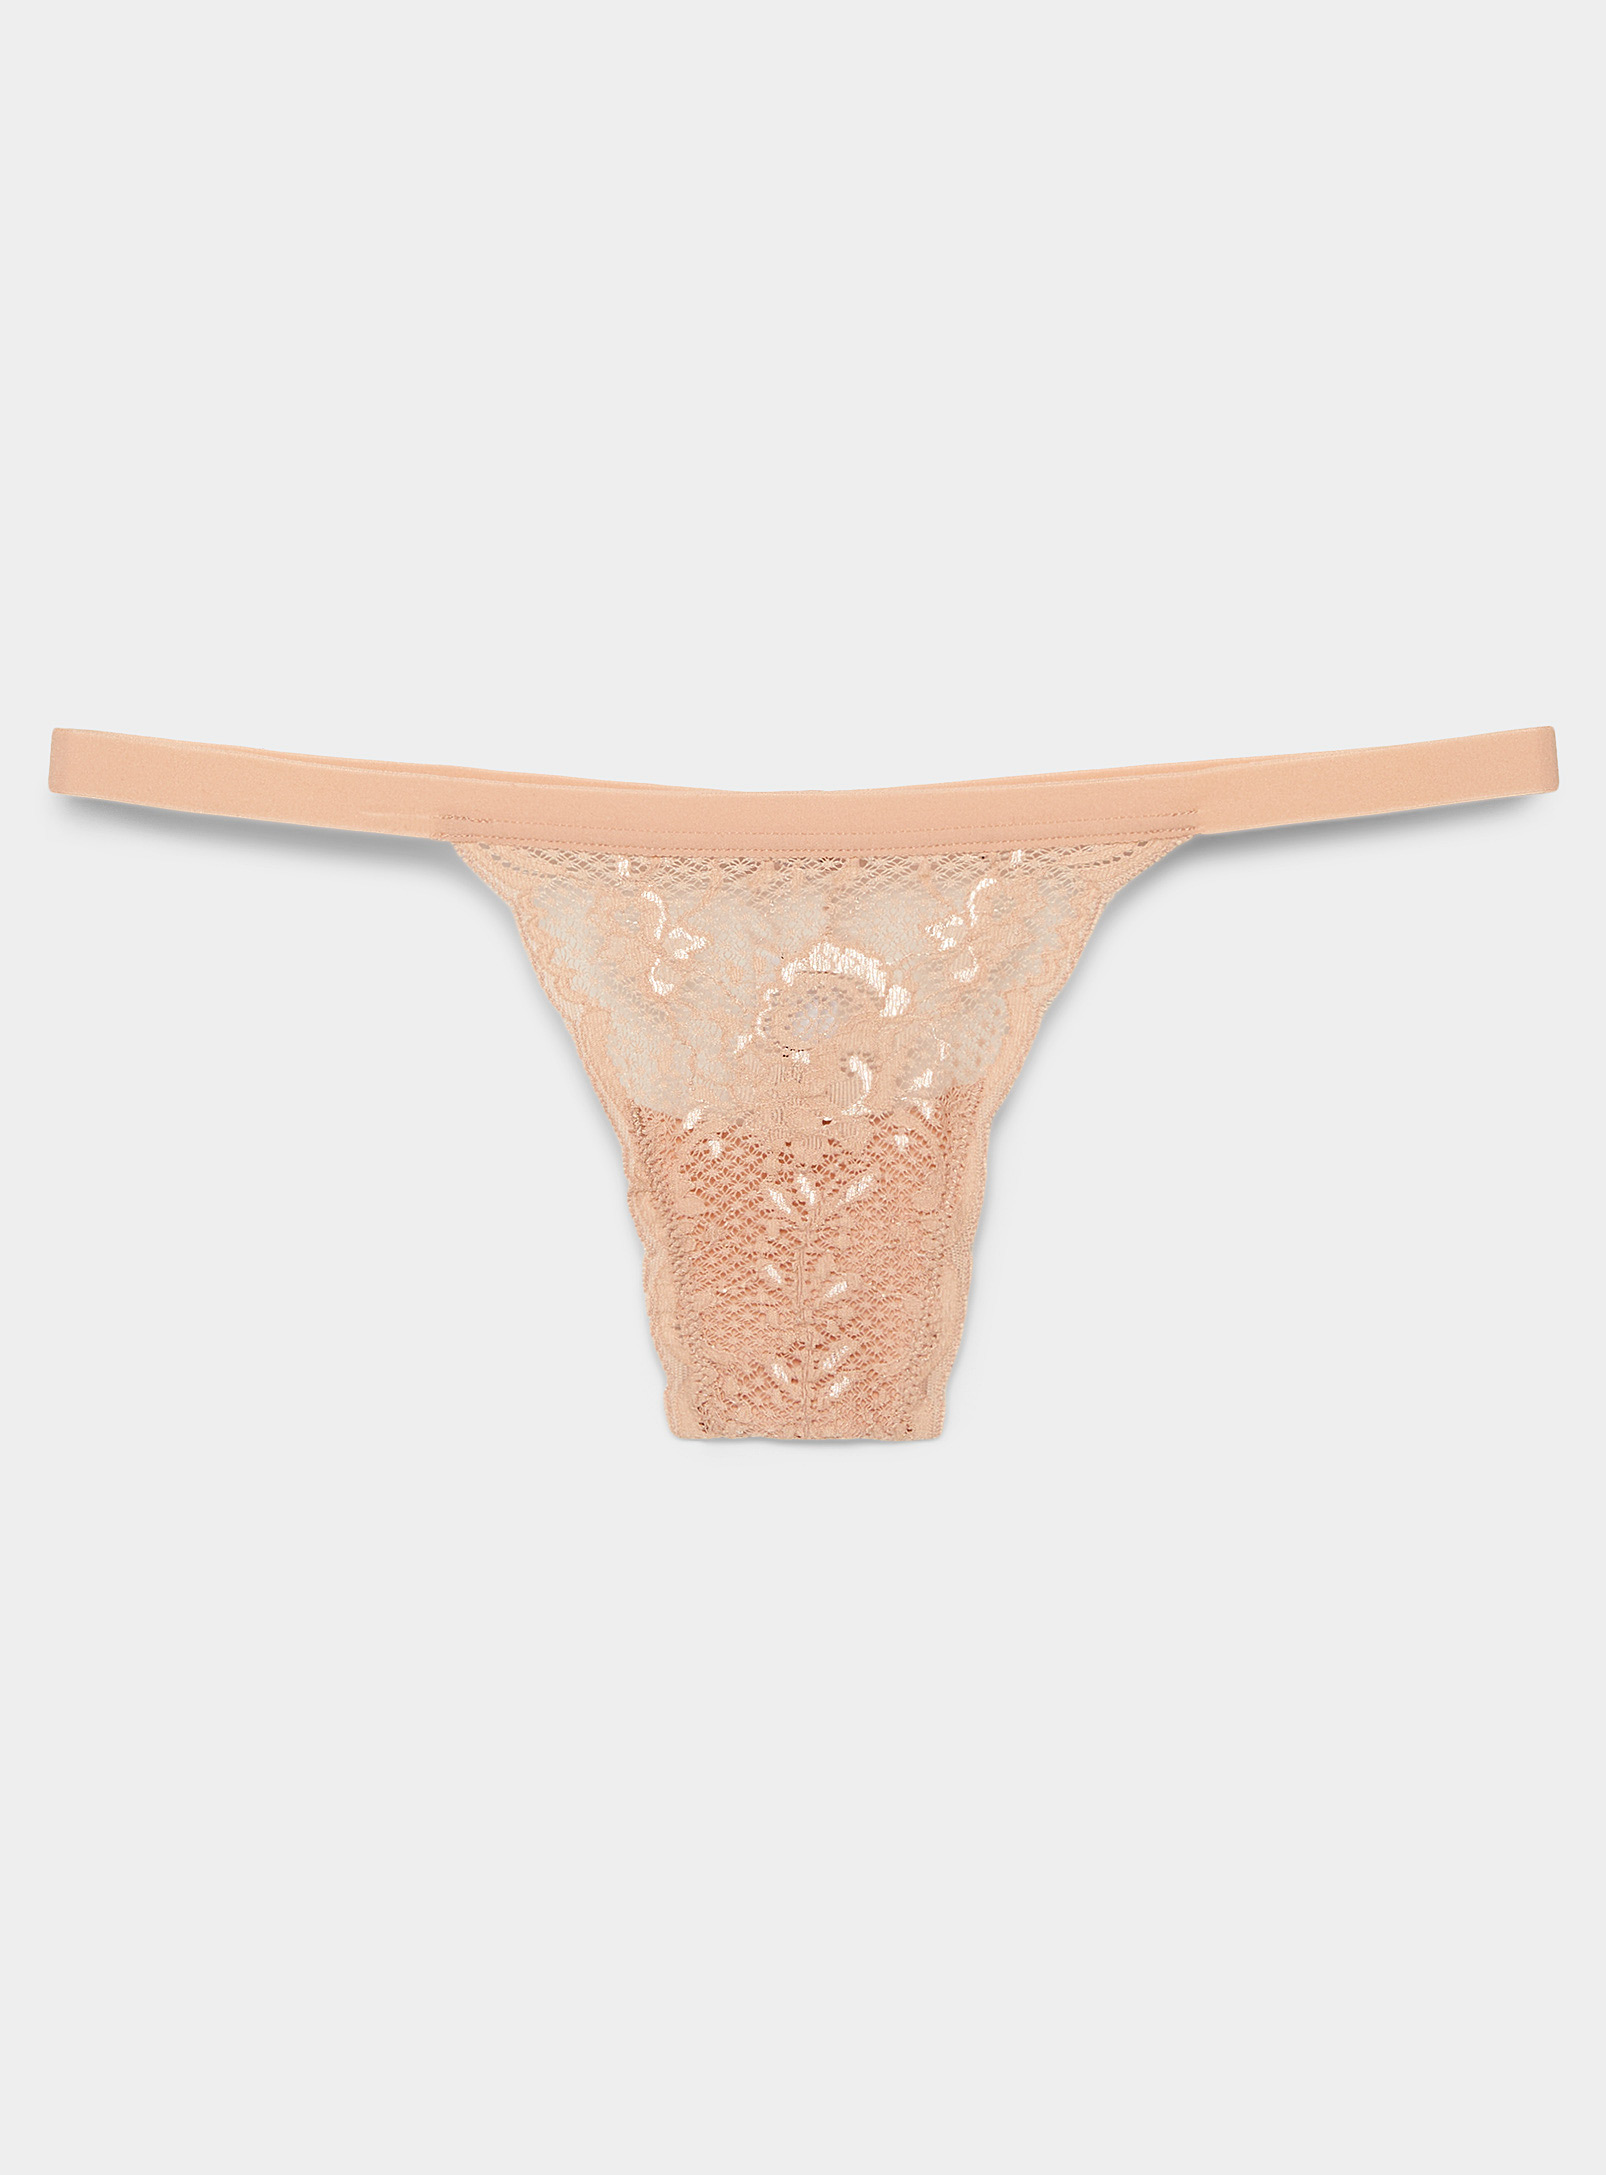 Cosabella Revealing Lace Thong In Ivory/cream Beige